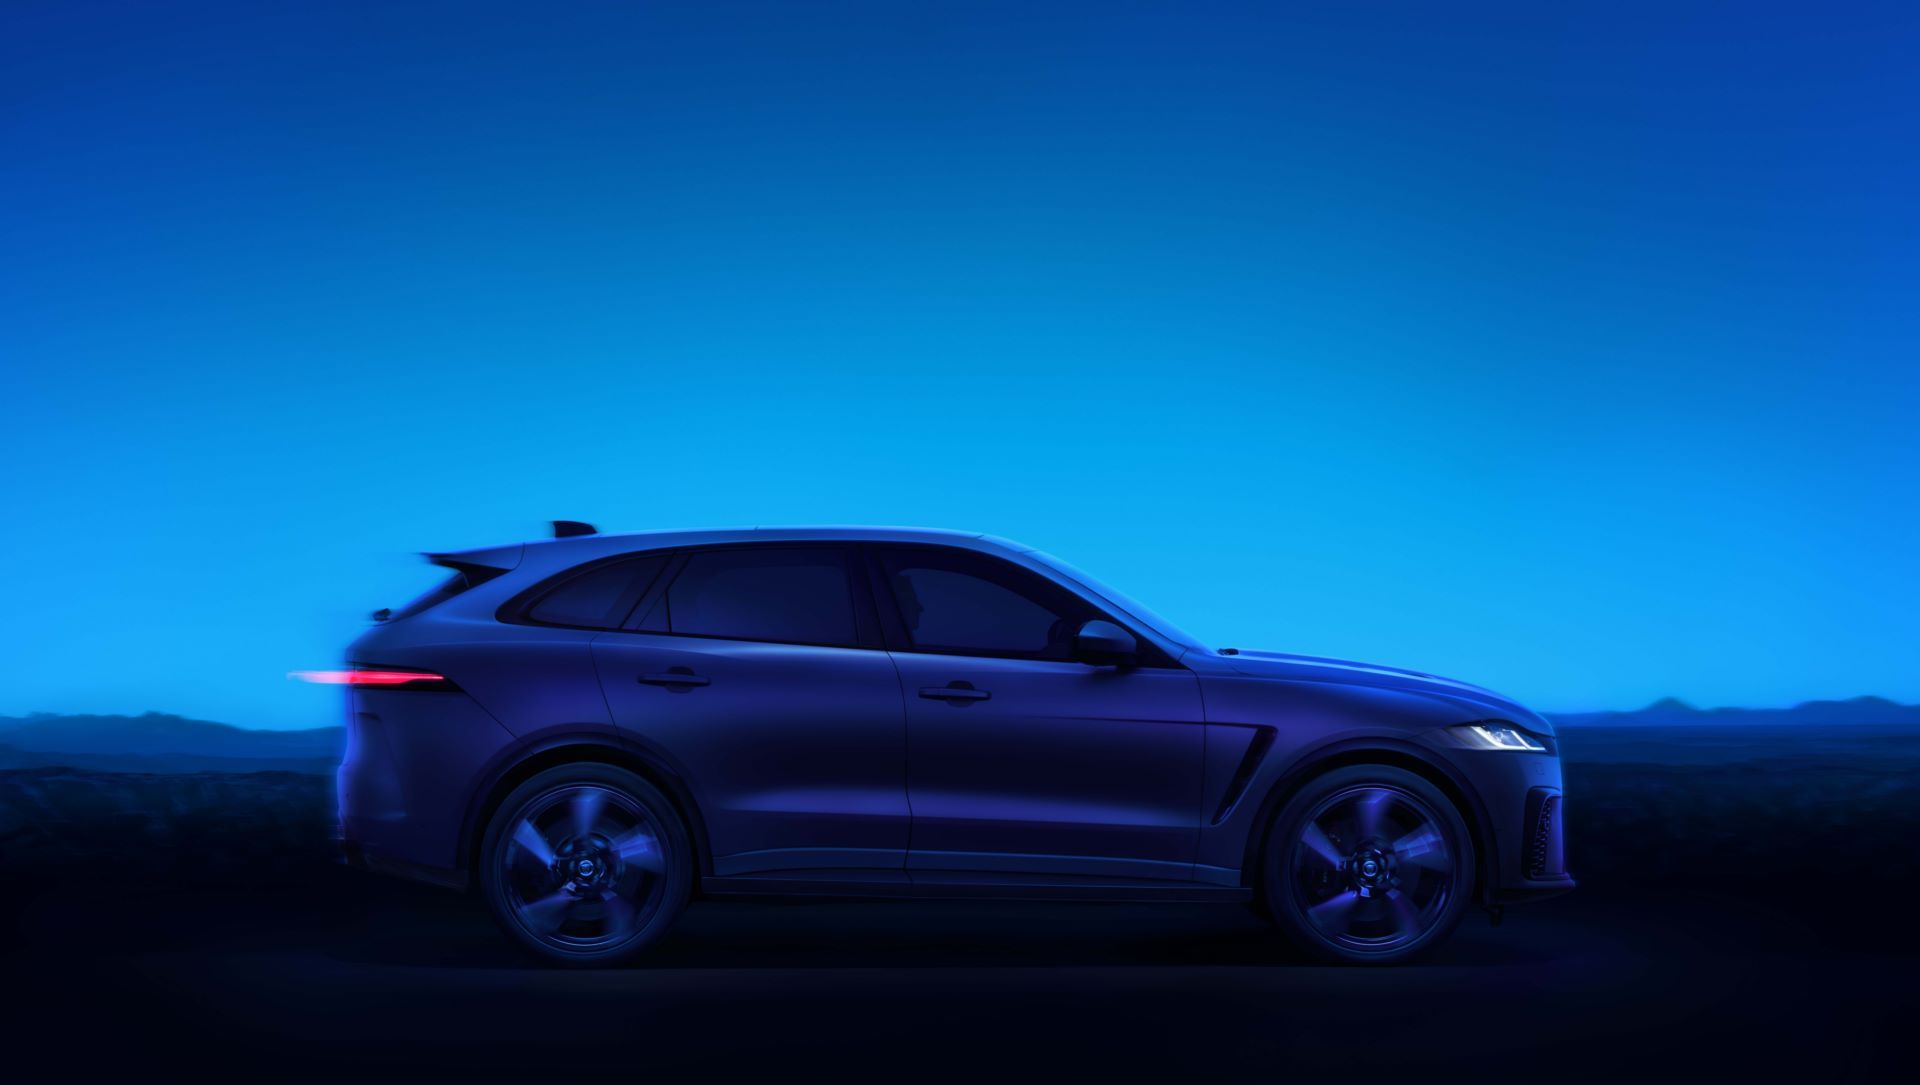 Jag_F-PACE_24MY_Exterior_06_Side_GL_056_PR_141222